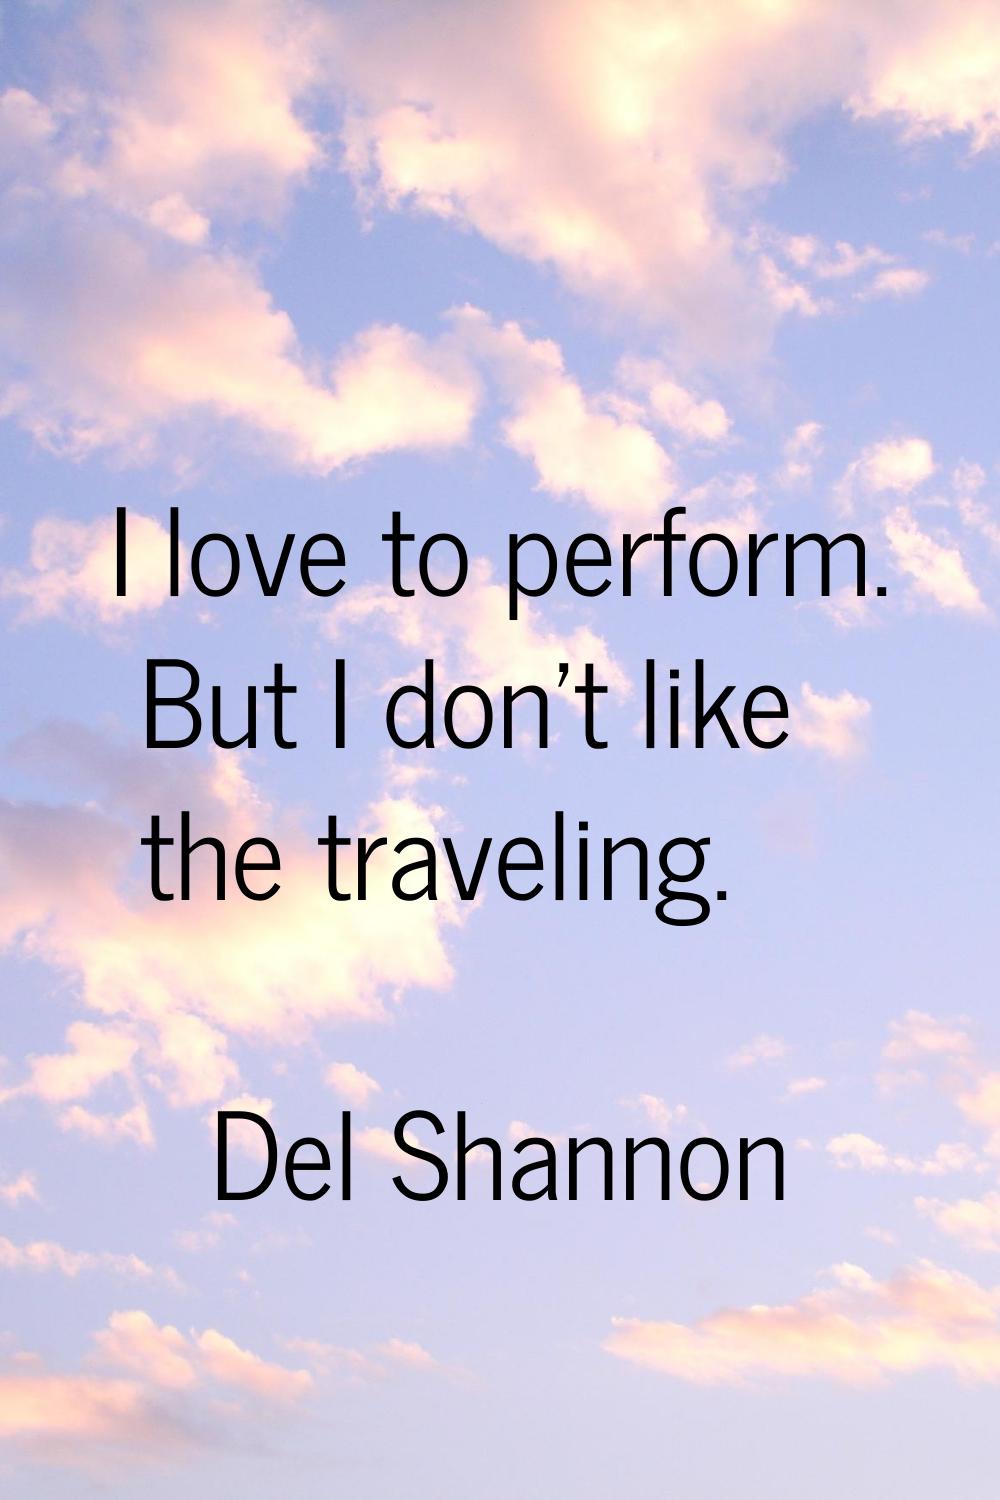 I love to perform. But I don't like the traveling.